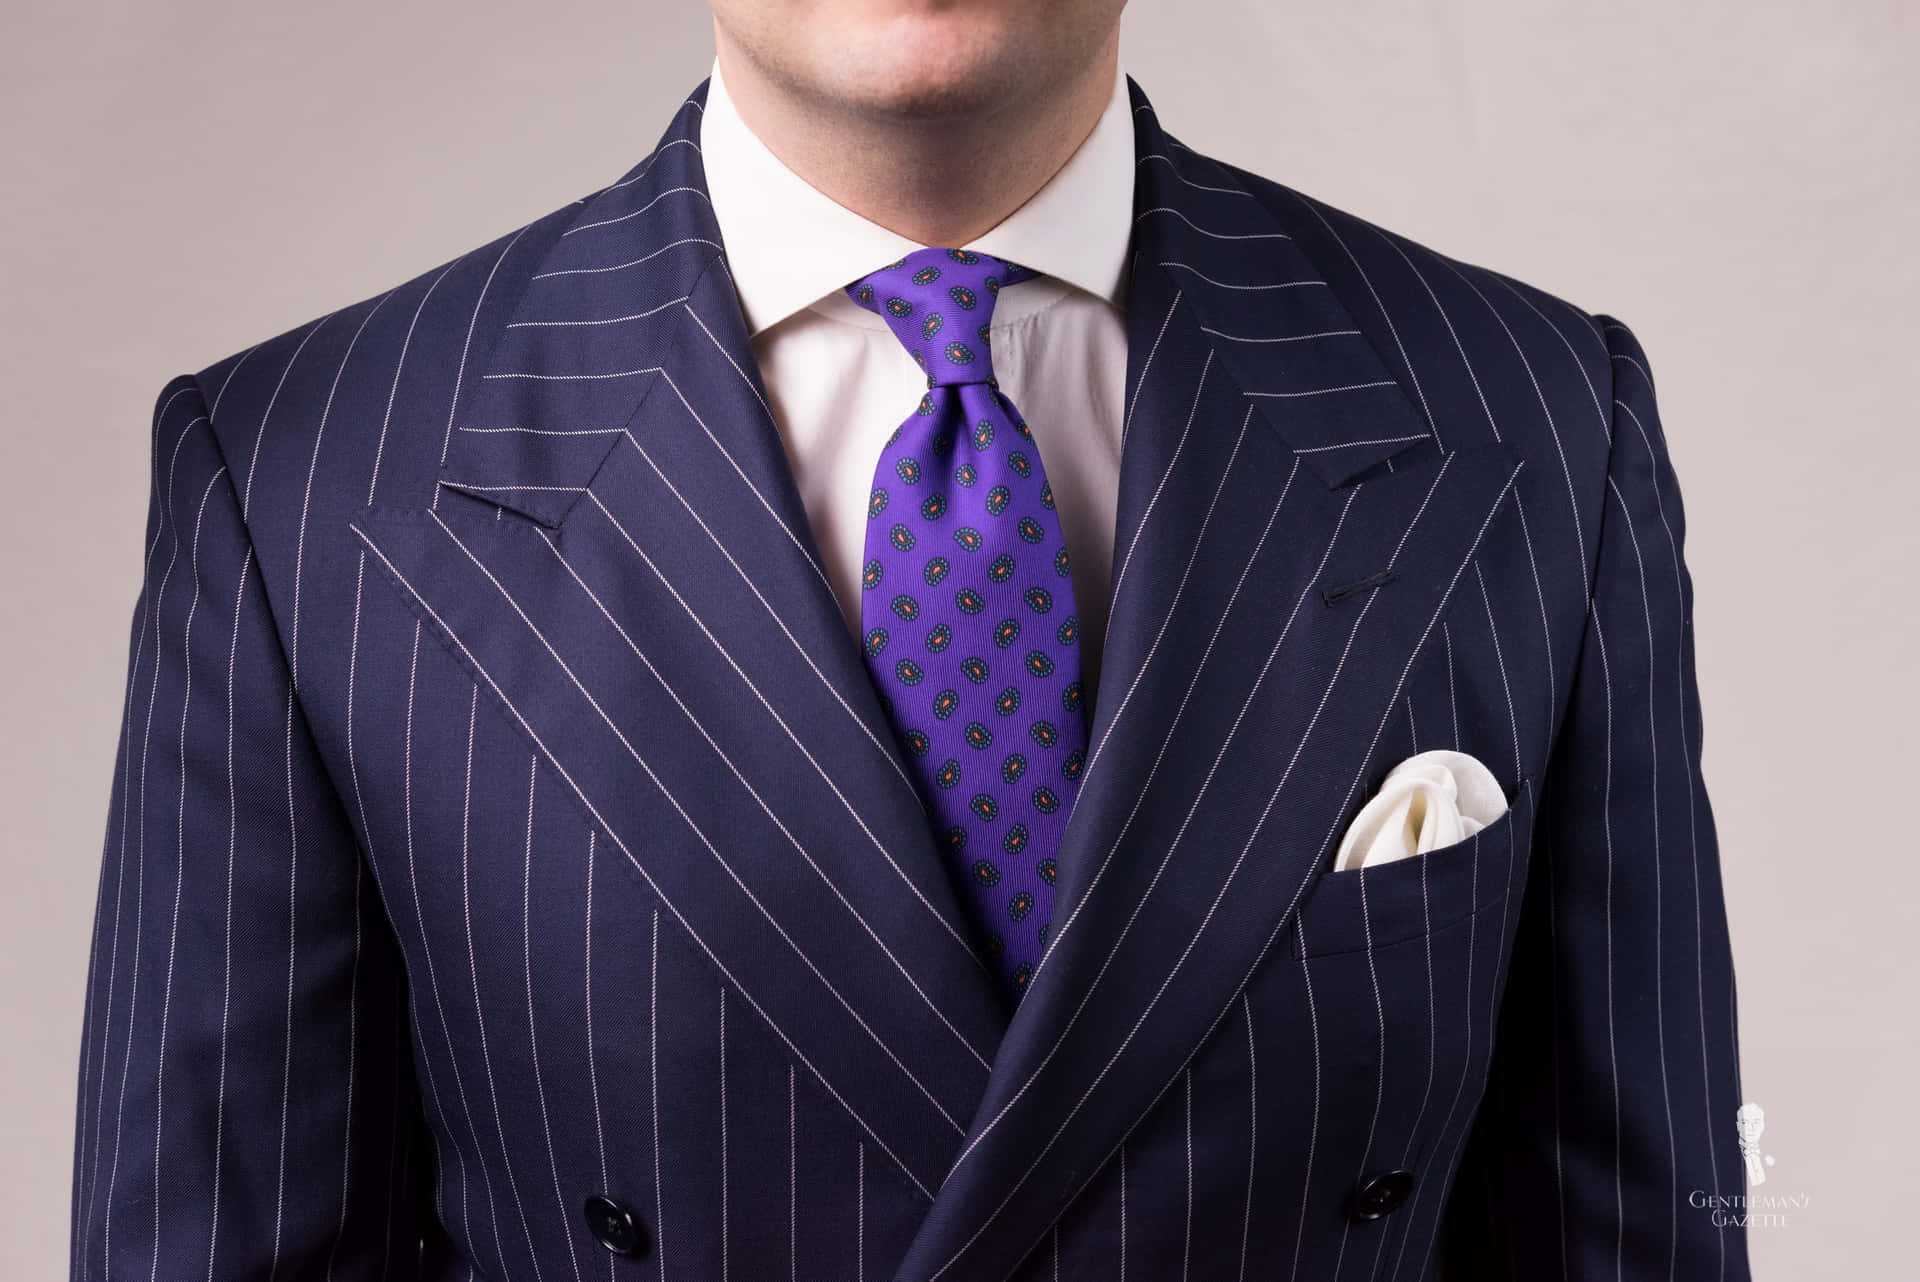 A Purple Tie for Sophisticated Style" Wallpaper